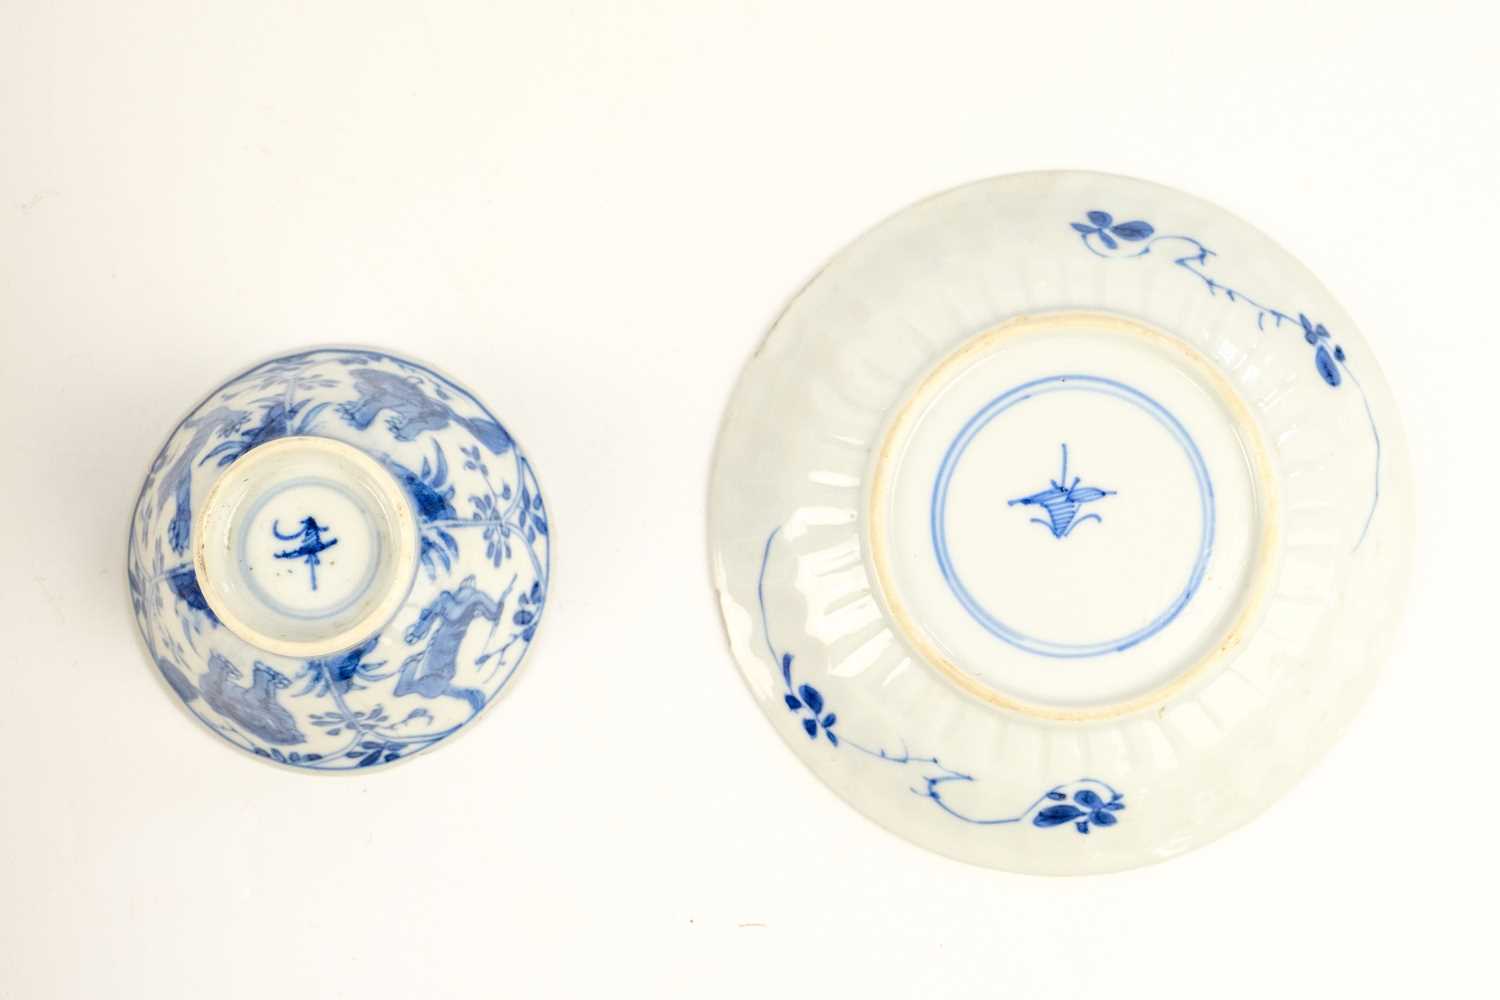 Five Chinese porcelain tea bowls and saucers, 18th century. - Image 14 of 18